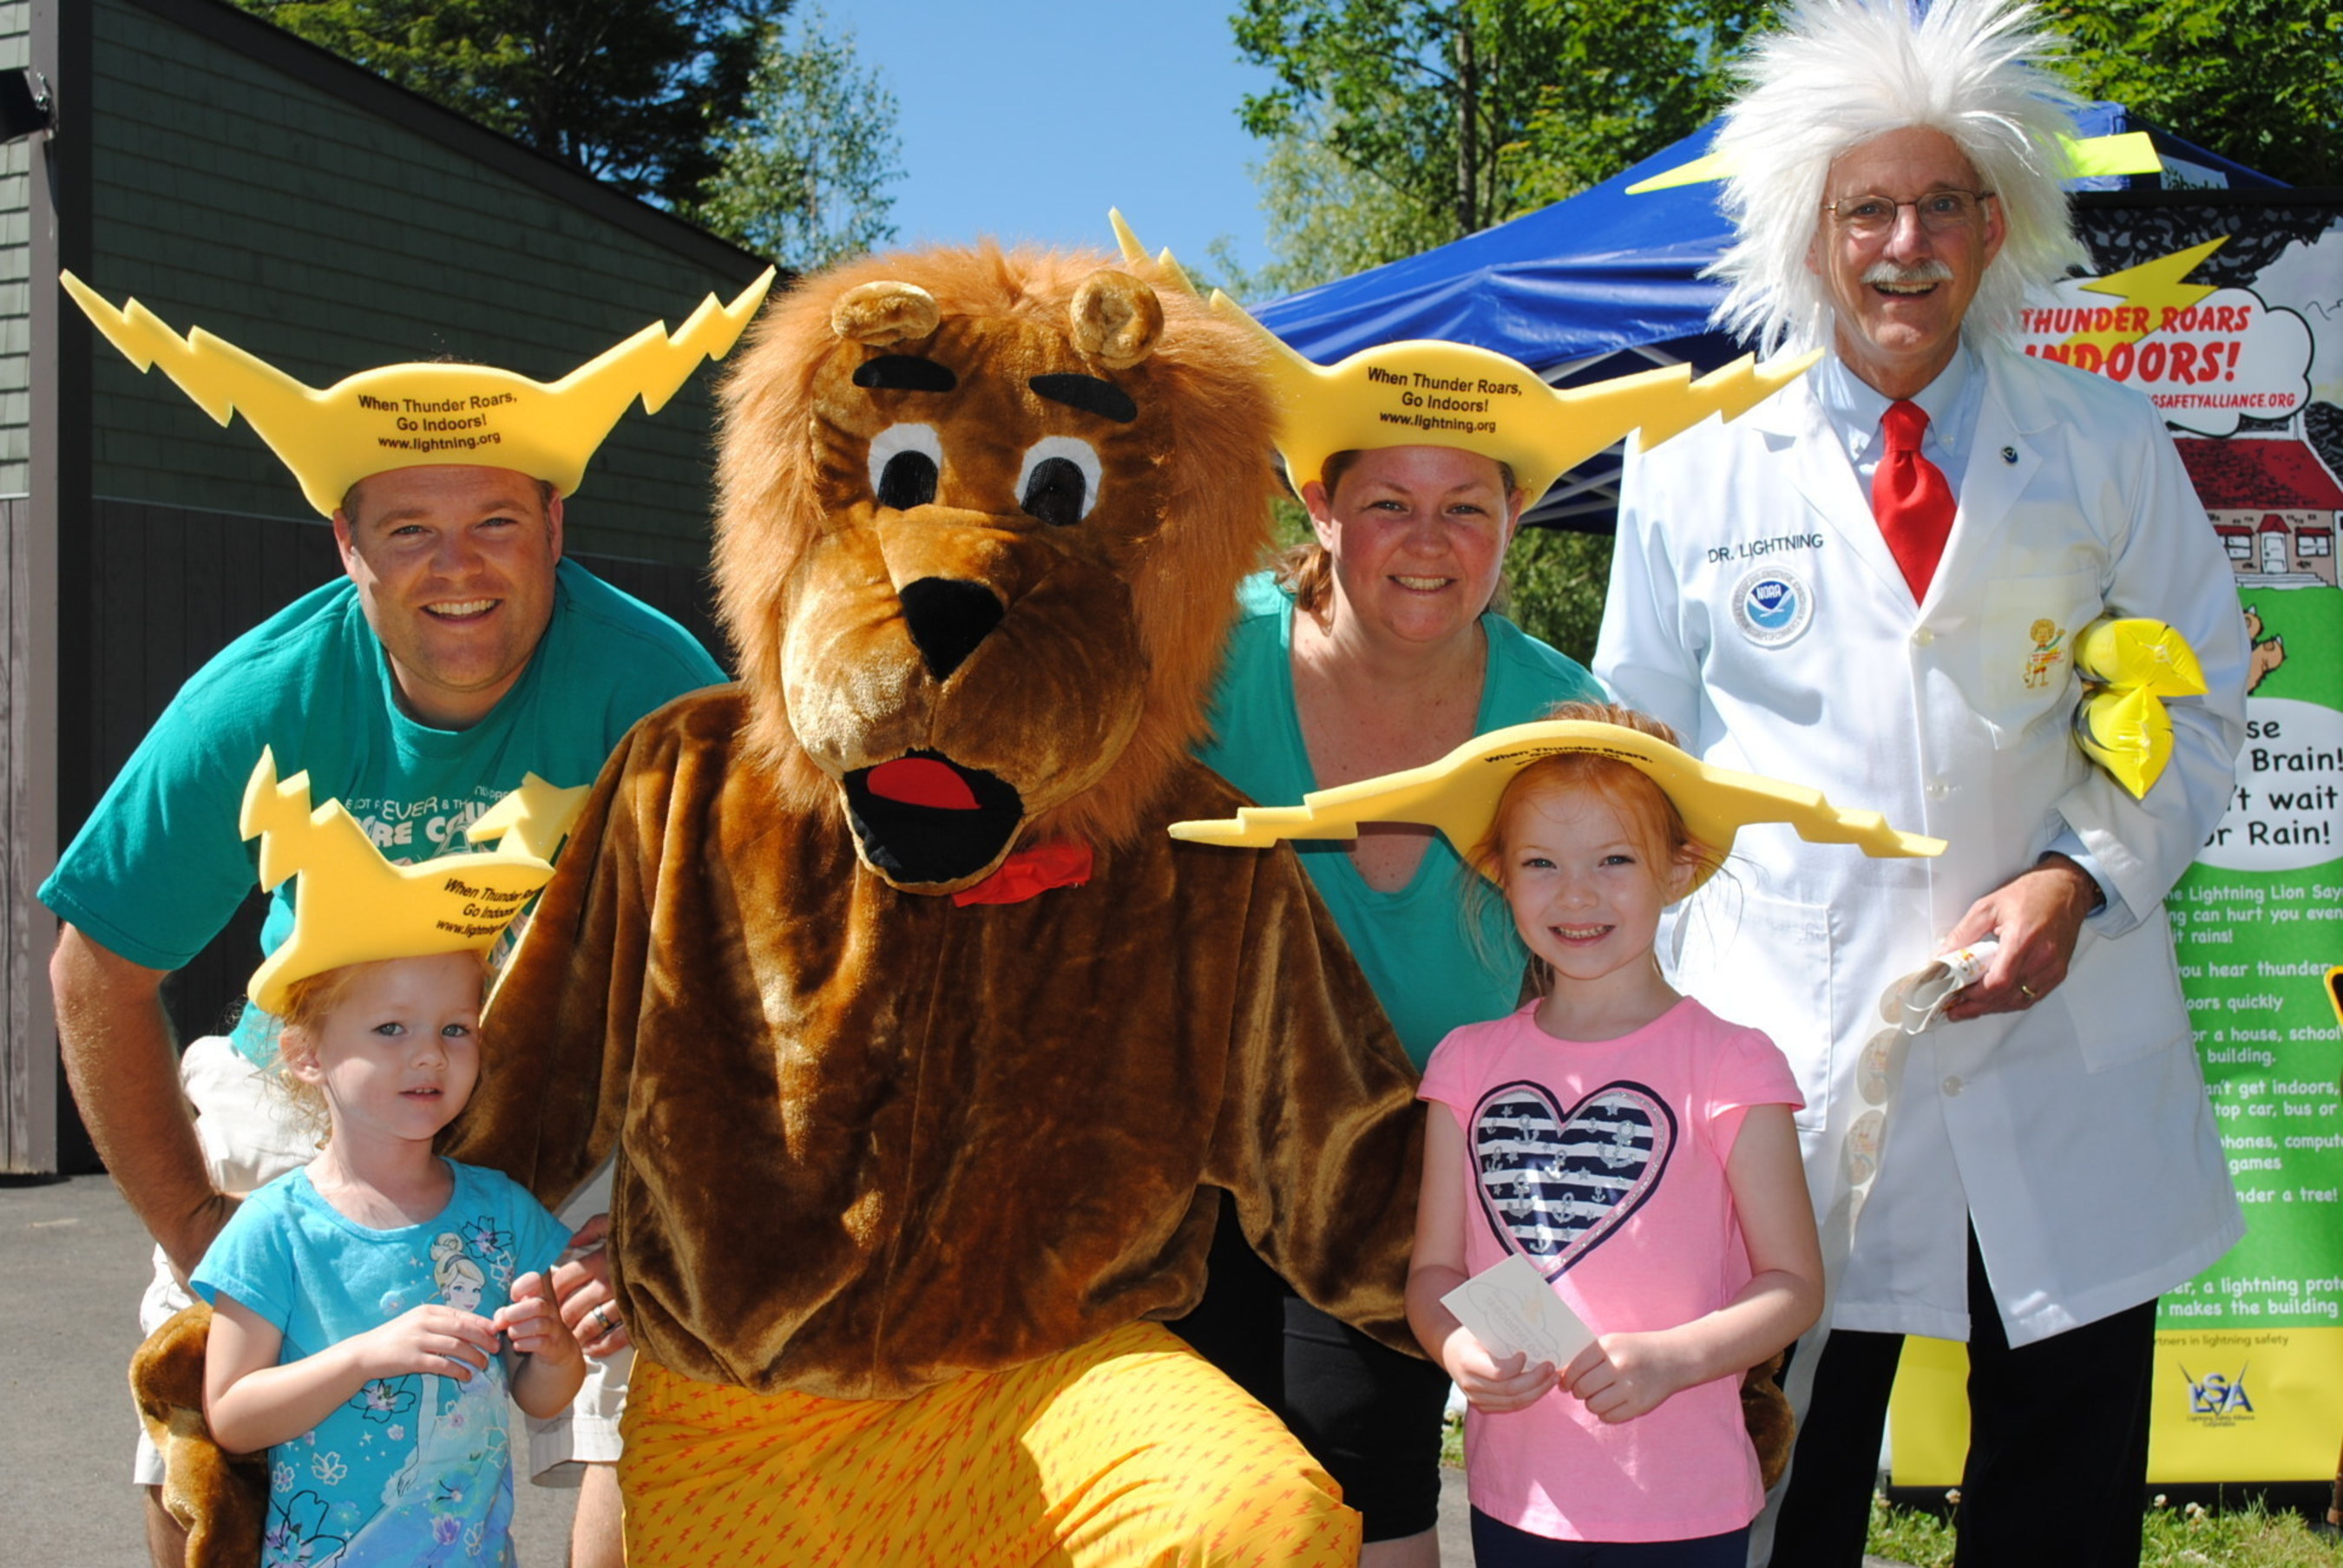 Leon the Lightning Lion and Dr. Lightning kickoff Lightning Safety Awareness Week at Storyland Park in NH to emphasize the importance of protecting people, property and places against nature's underrated hazard.